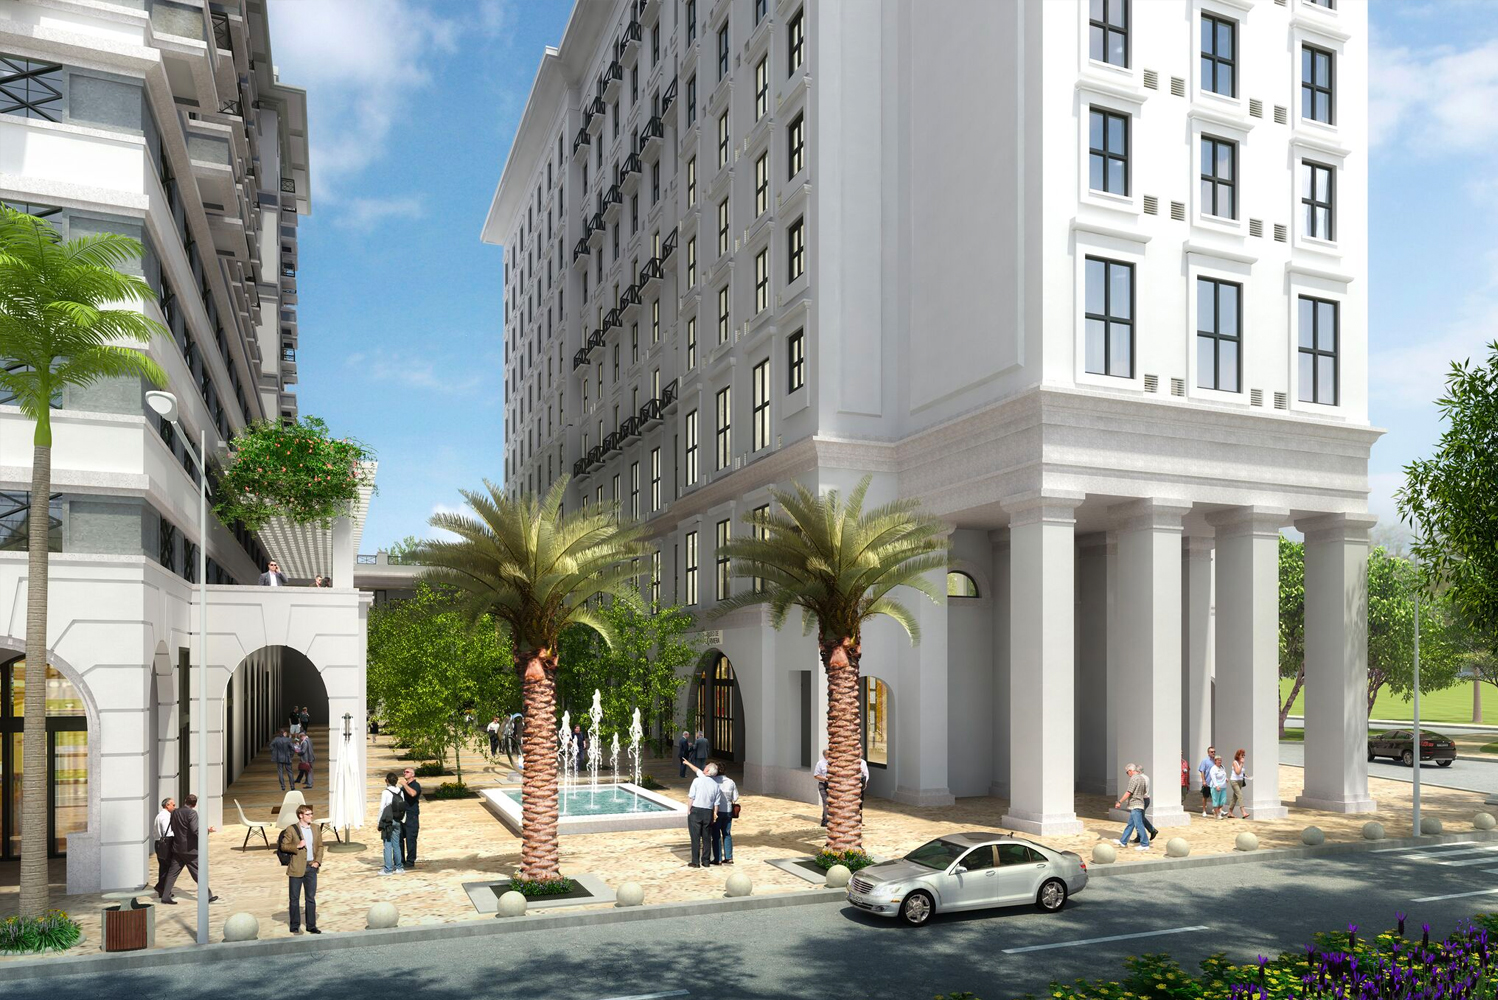 Nolan Reynolds International launched THsis Hotels with its first property set to open in Coral Gables Florida this March